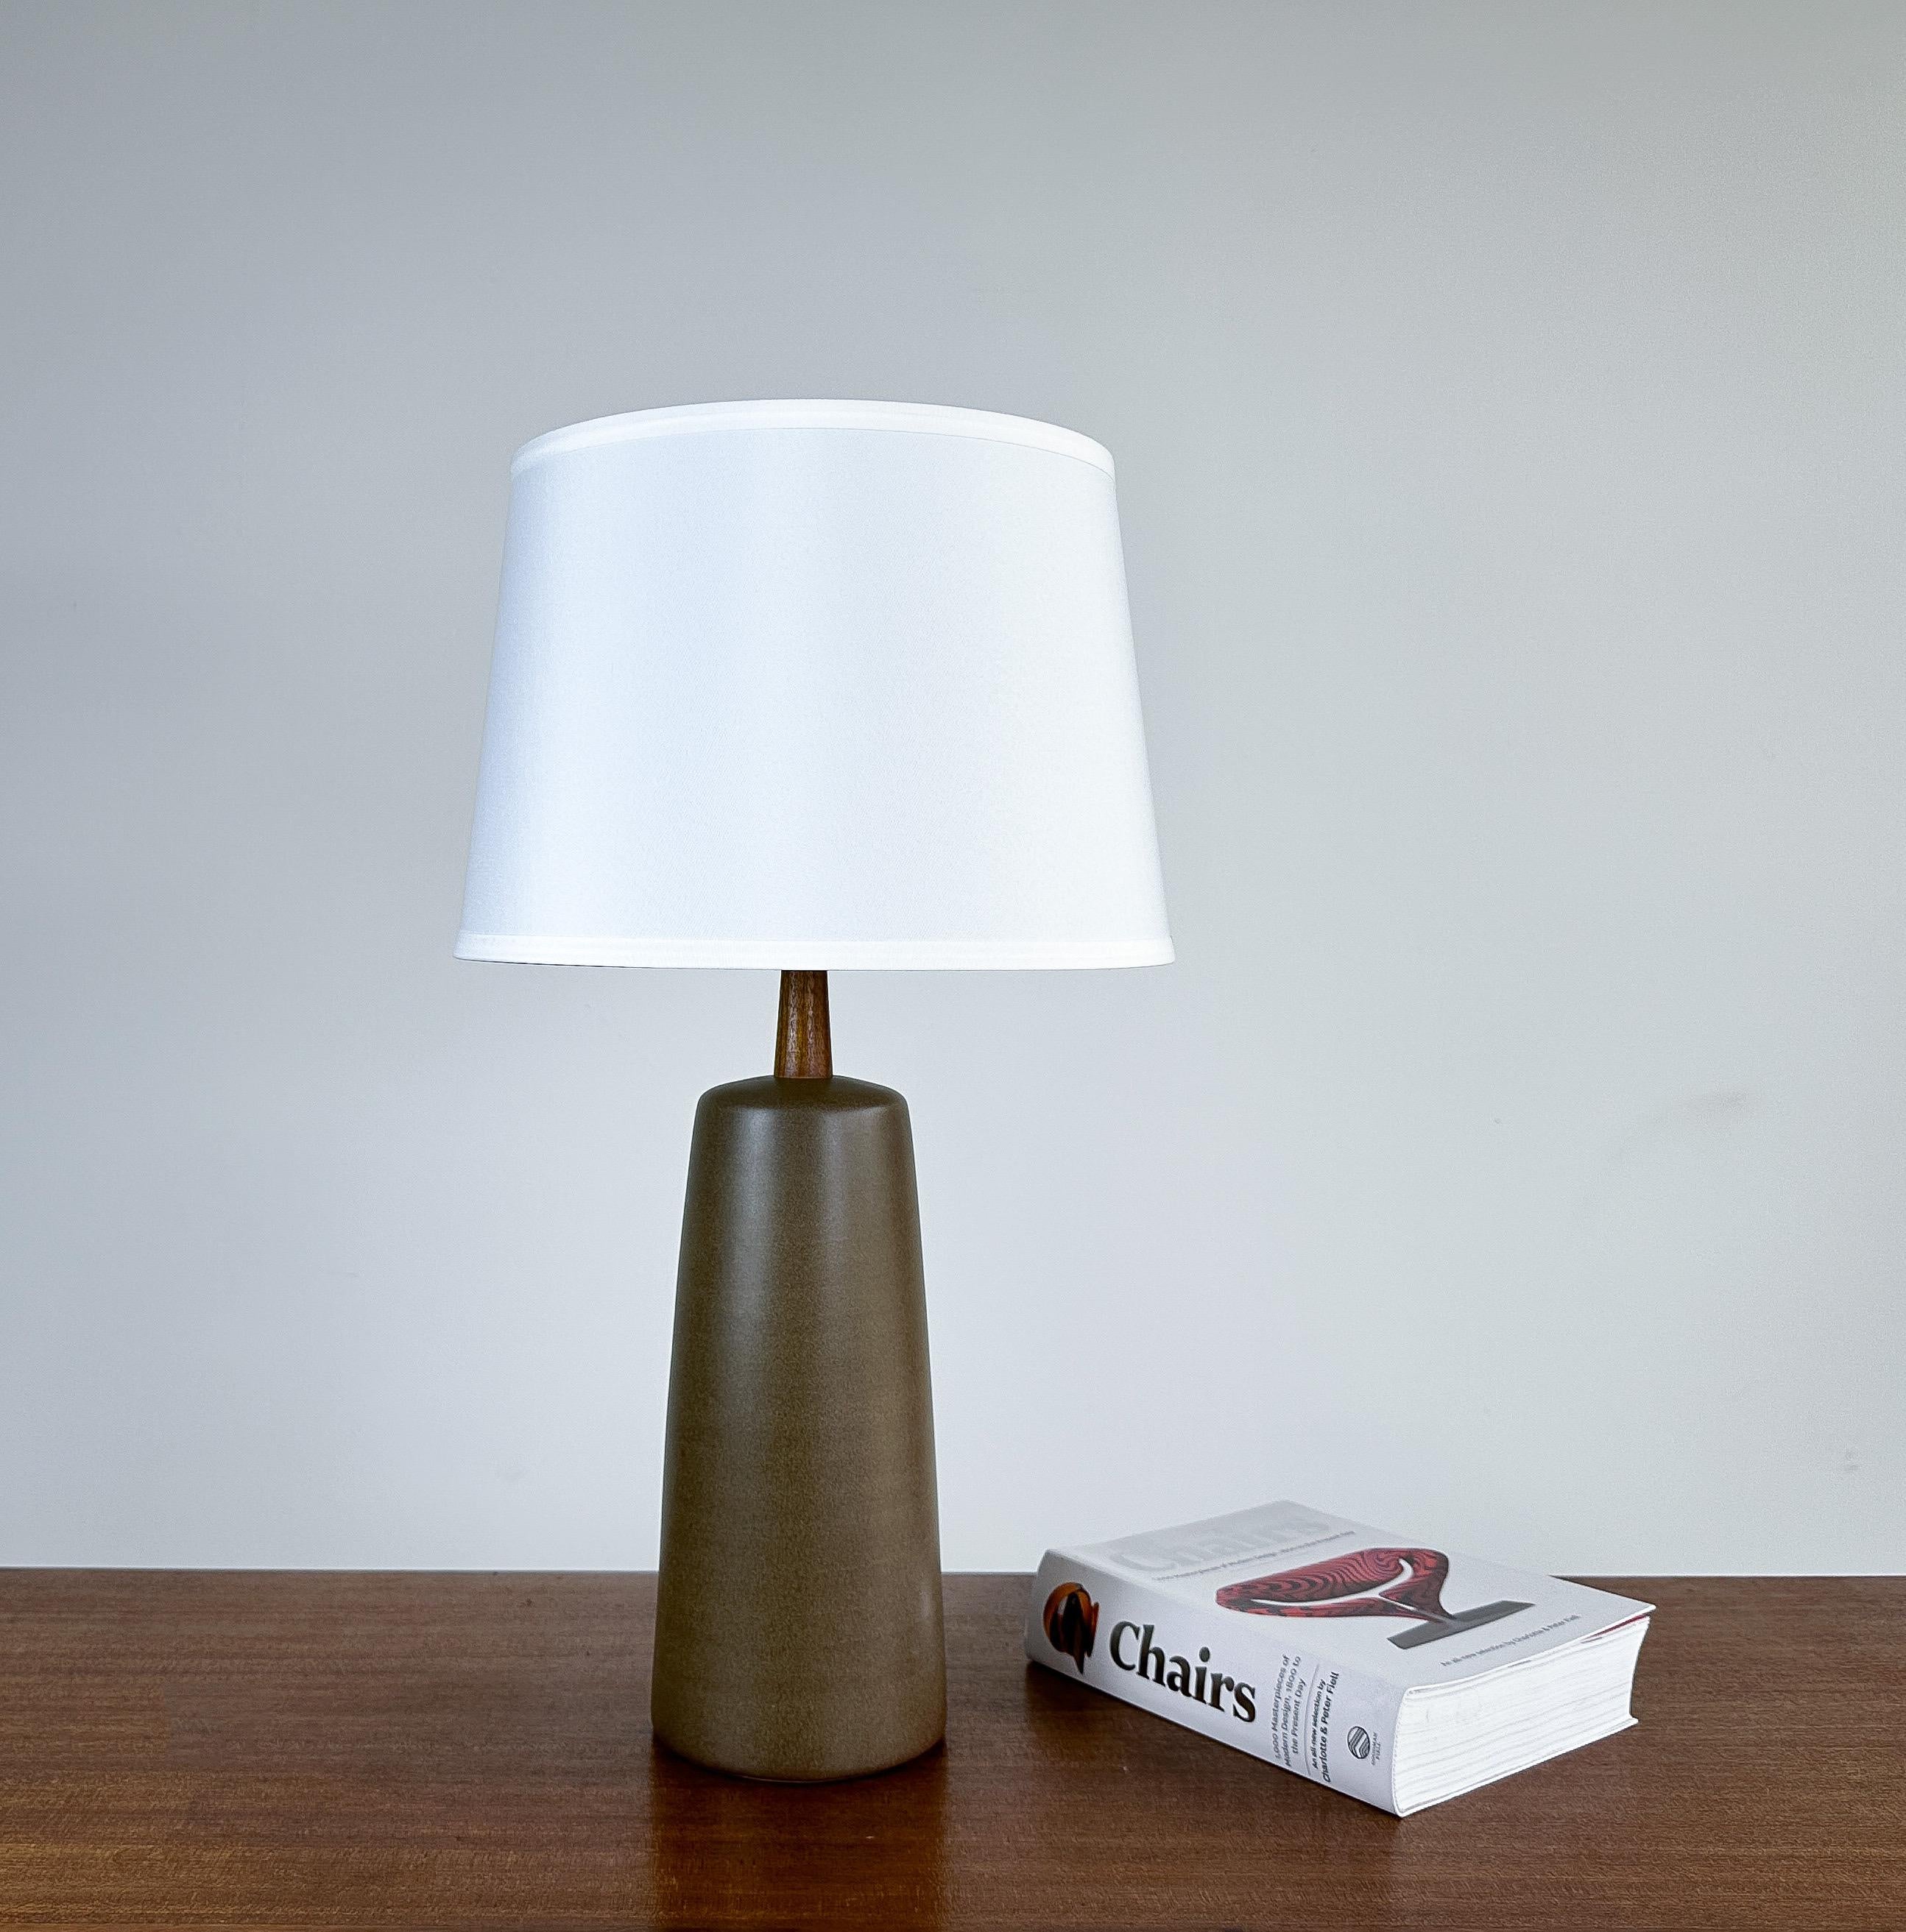 Offered is a fantastic table lamp by renowned duo Jane and Gordon Martz for Marshall Studios, circa 1960s.

Featuring a lovely, lightly speckled cocoa glaze paired with the signature solid walnut neck and finial. This particular model has wonderful